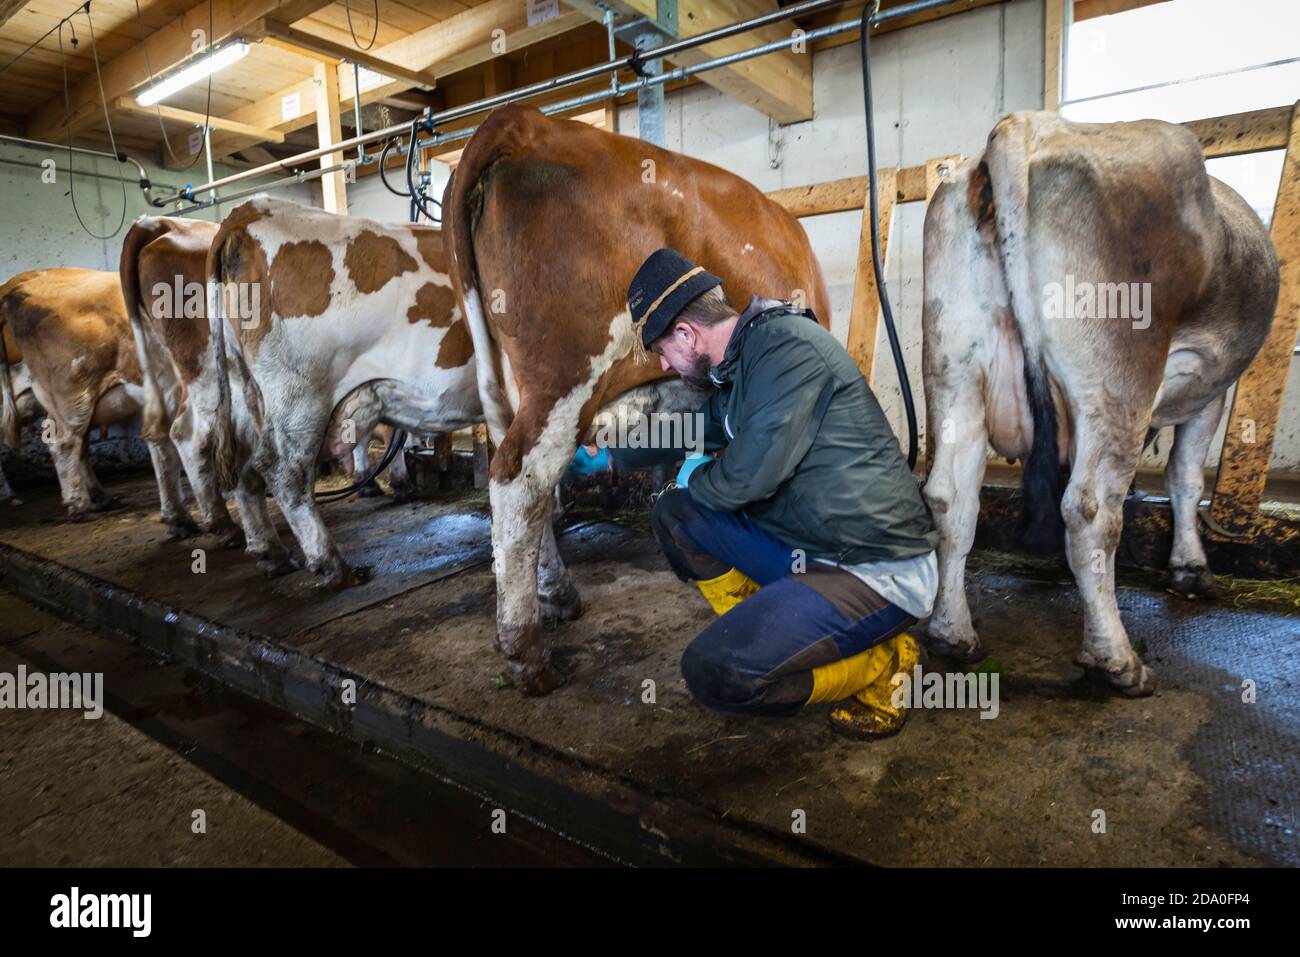 Farmer connects the milking machine to the teats on the udder of a dairy cow, Ackernalm, Tyrol, Austria Stock Photo